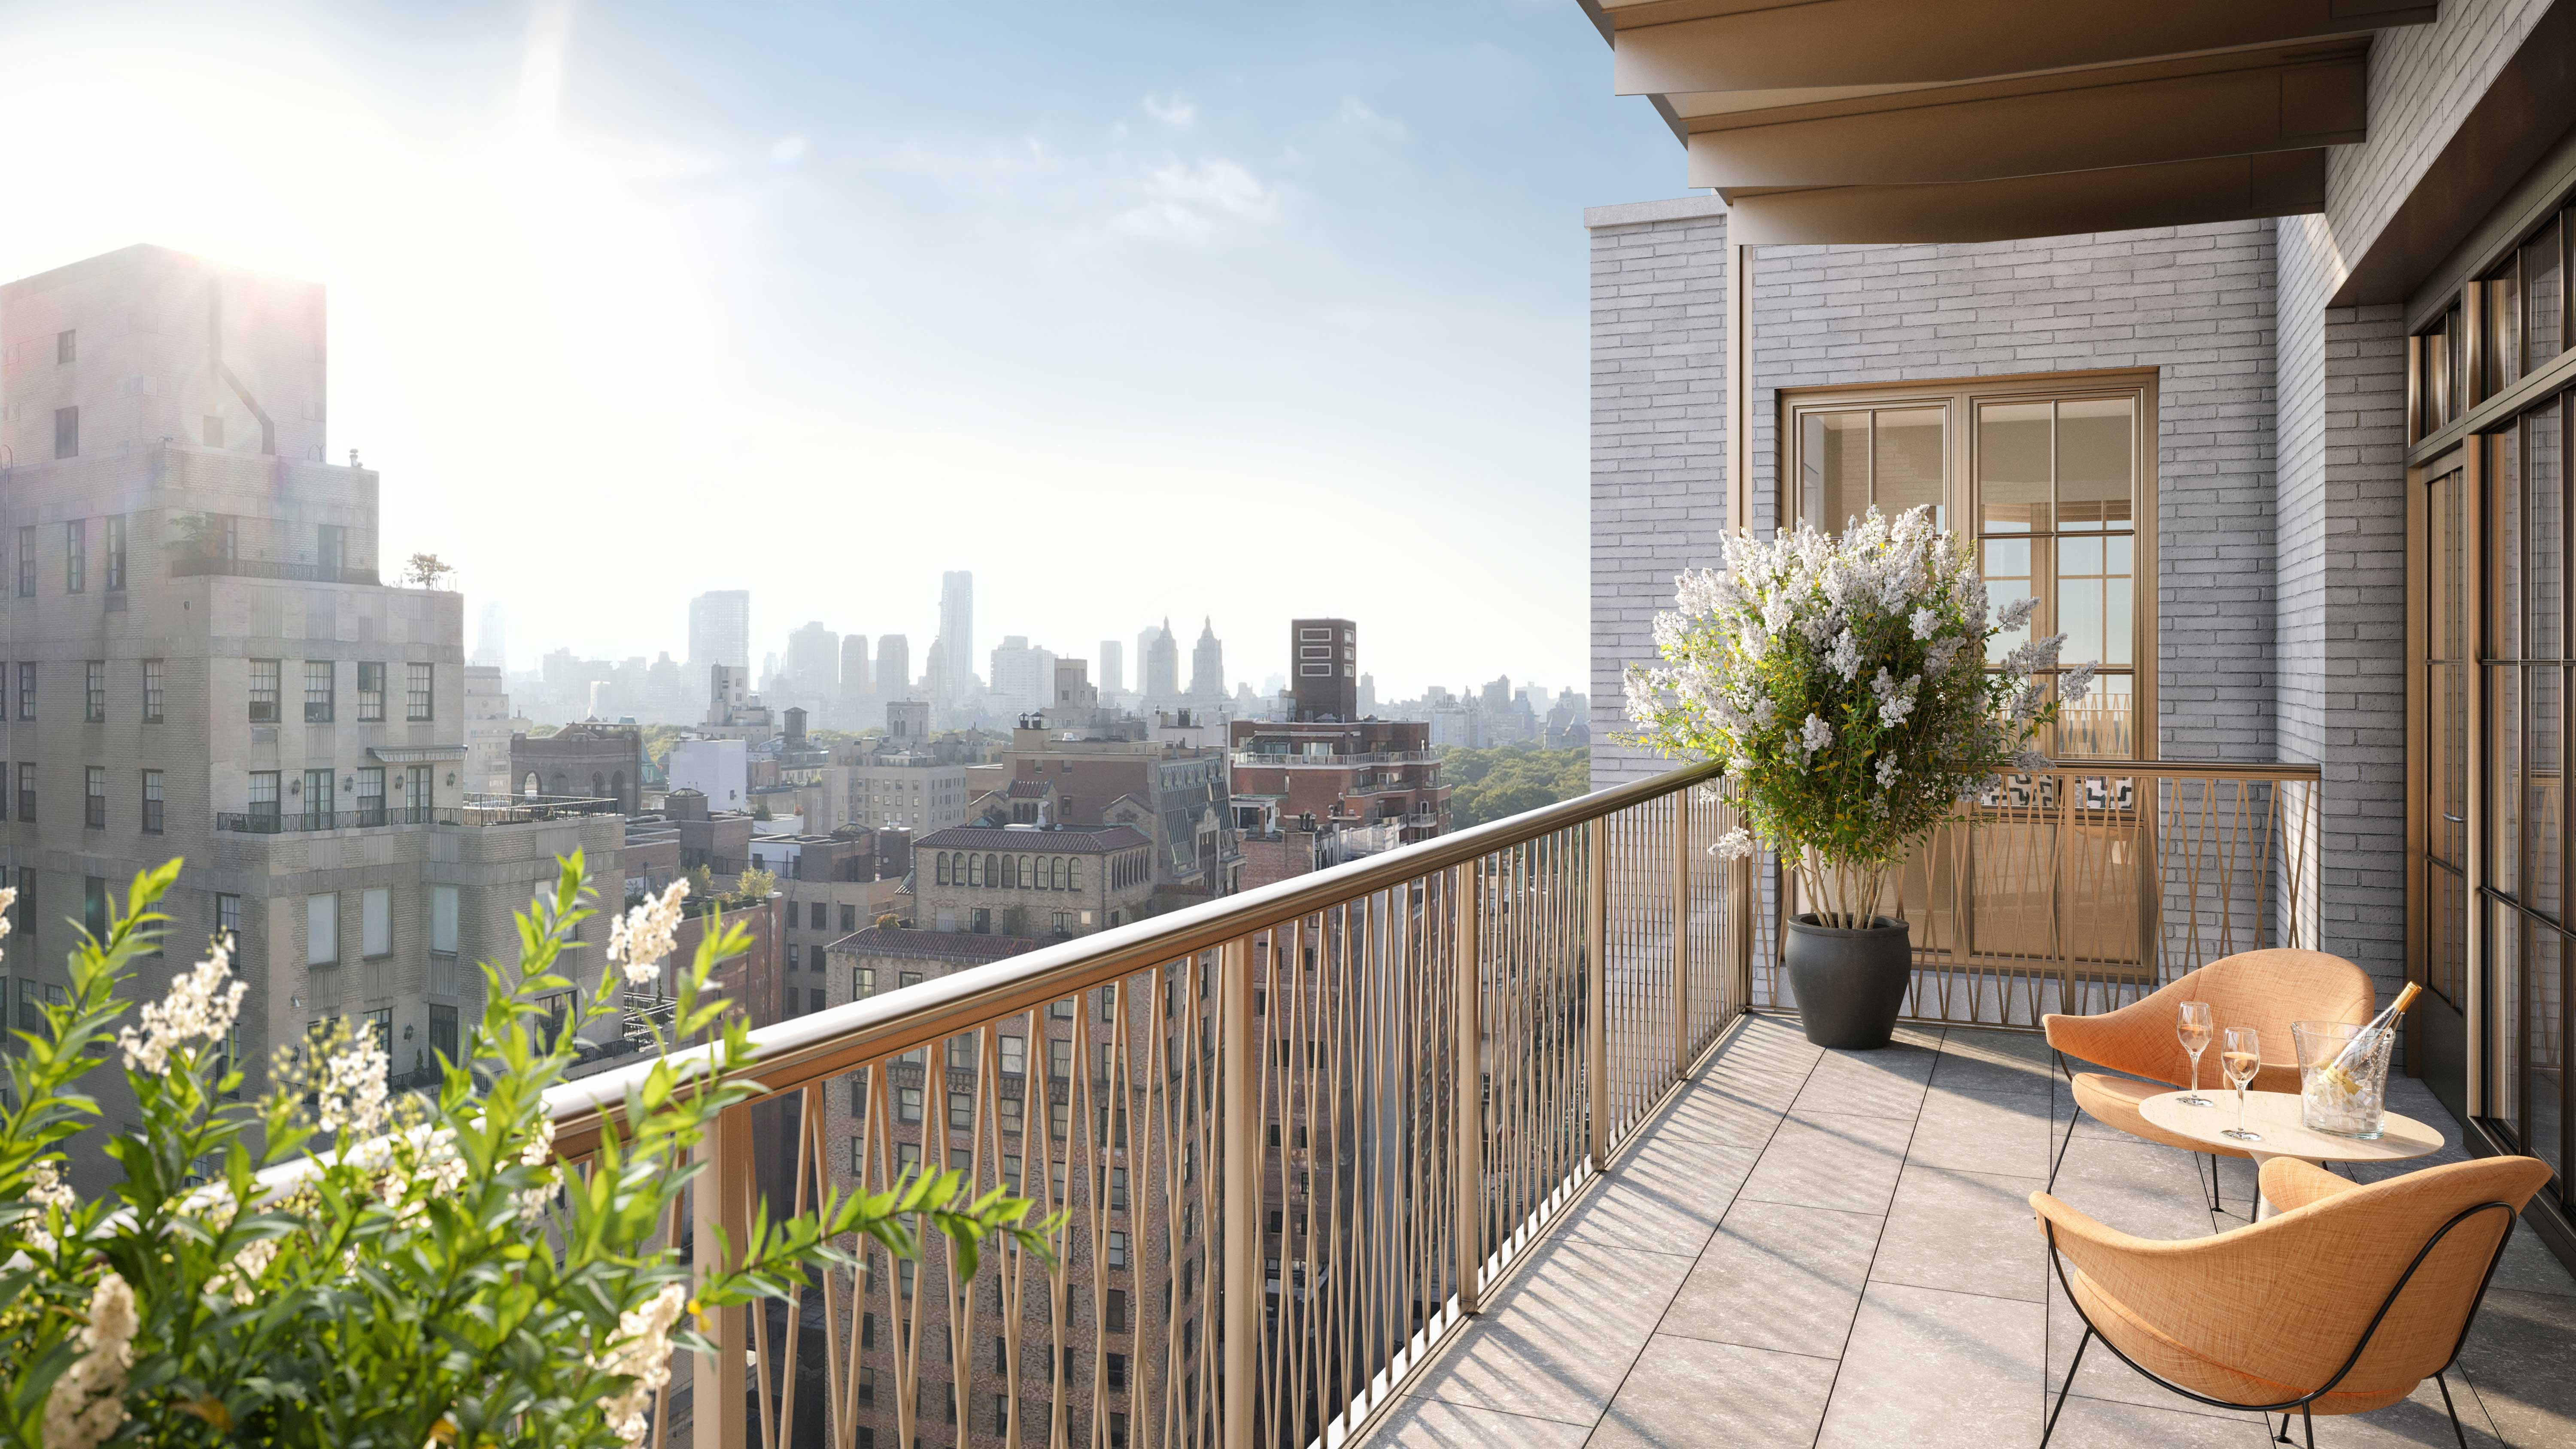  Penthouse 17 private balcony